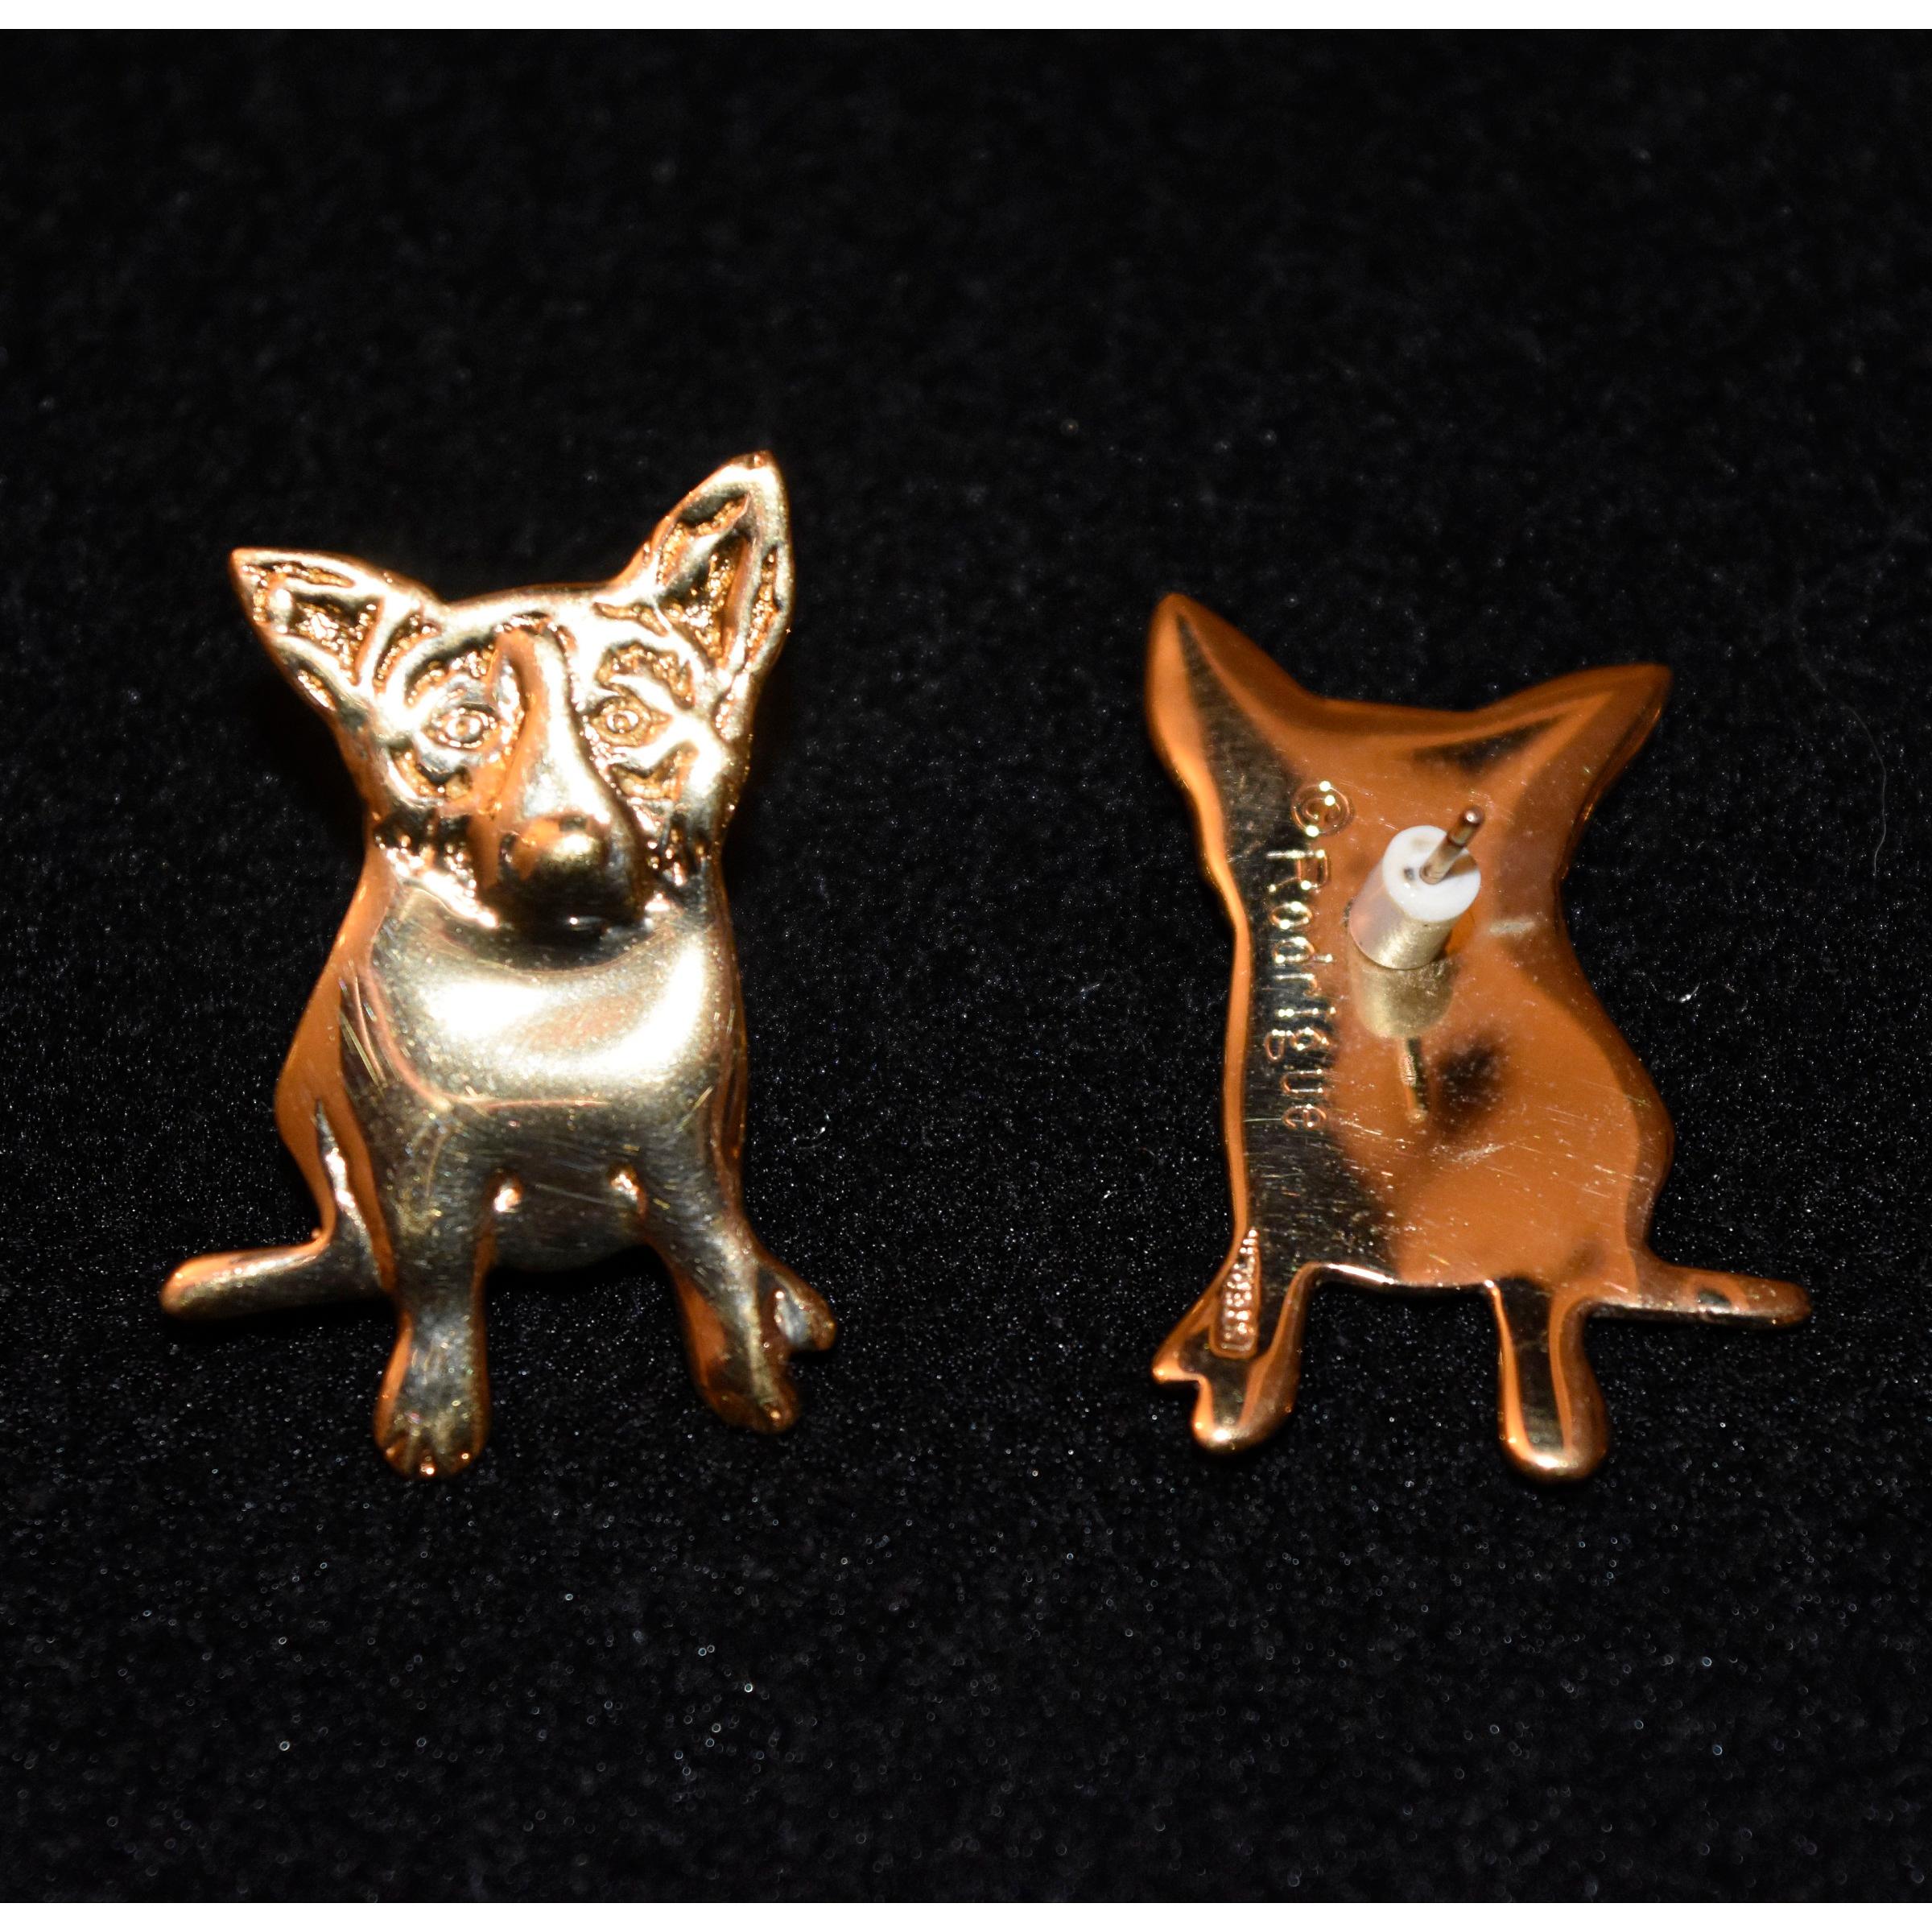 Artist:  George Rodrigue
Title:  Blue Dog Sterling/Gold Plated Pierced Earrings
Medium:  Foundry Jewelry
Date:  Circa 1993
Dimensions:  1 1/4